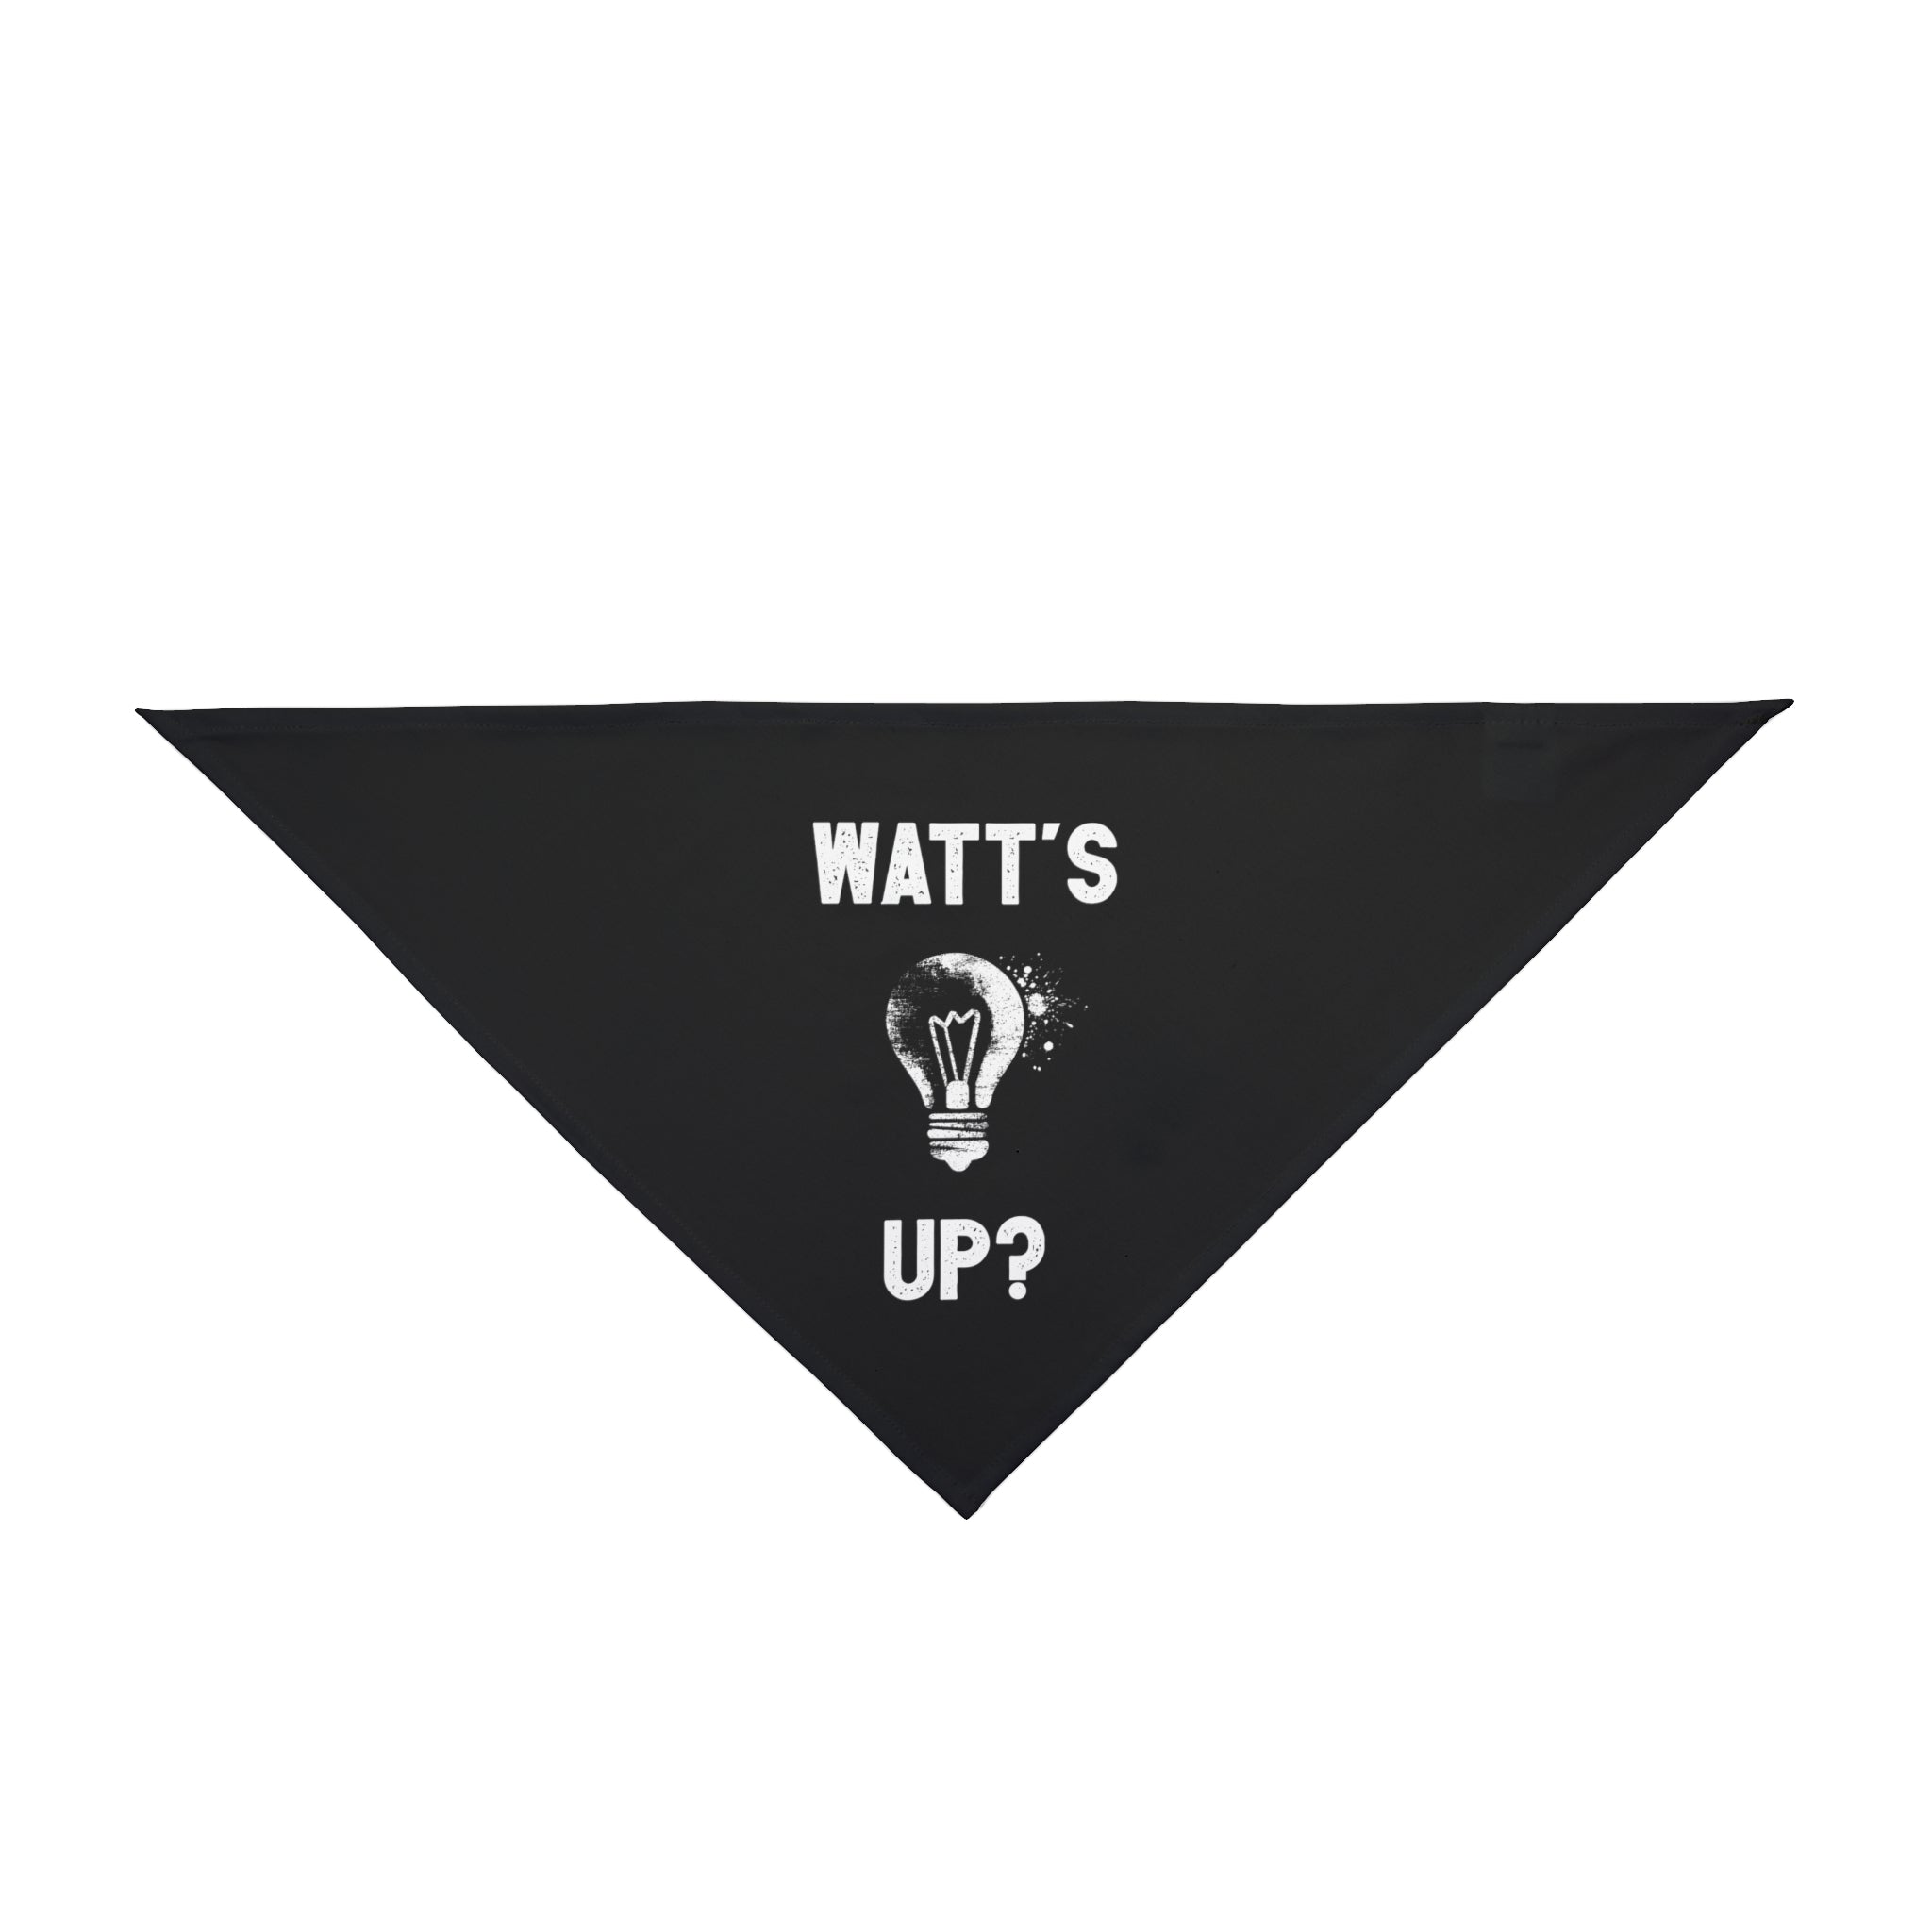 A Watts Up - Pet Bandana made from spun polyester, featuring the text "WATT'S UP?" and a light bulb graphic in the center.